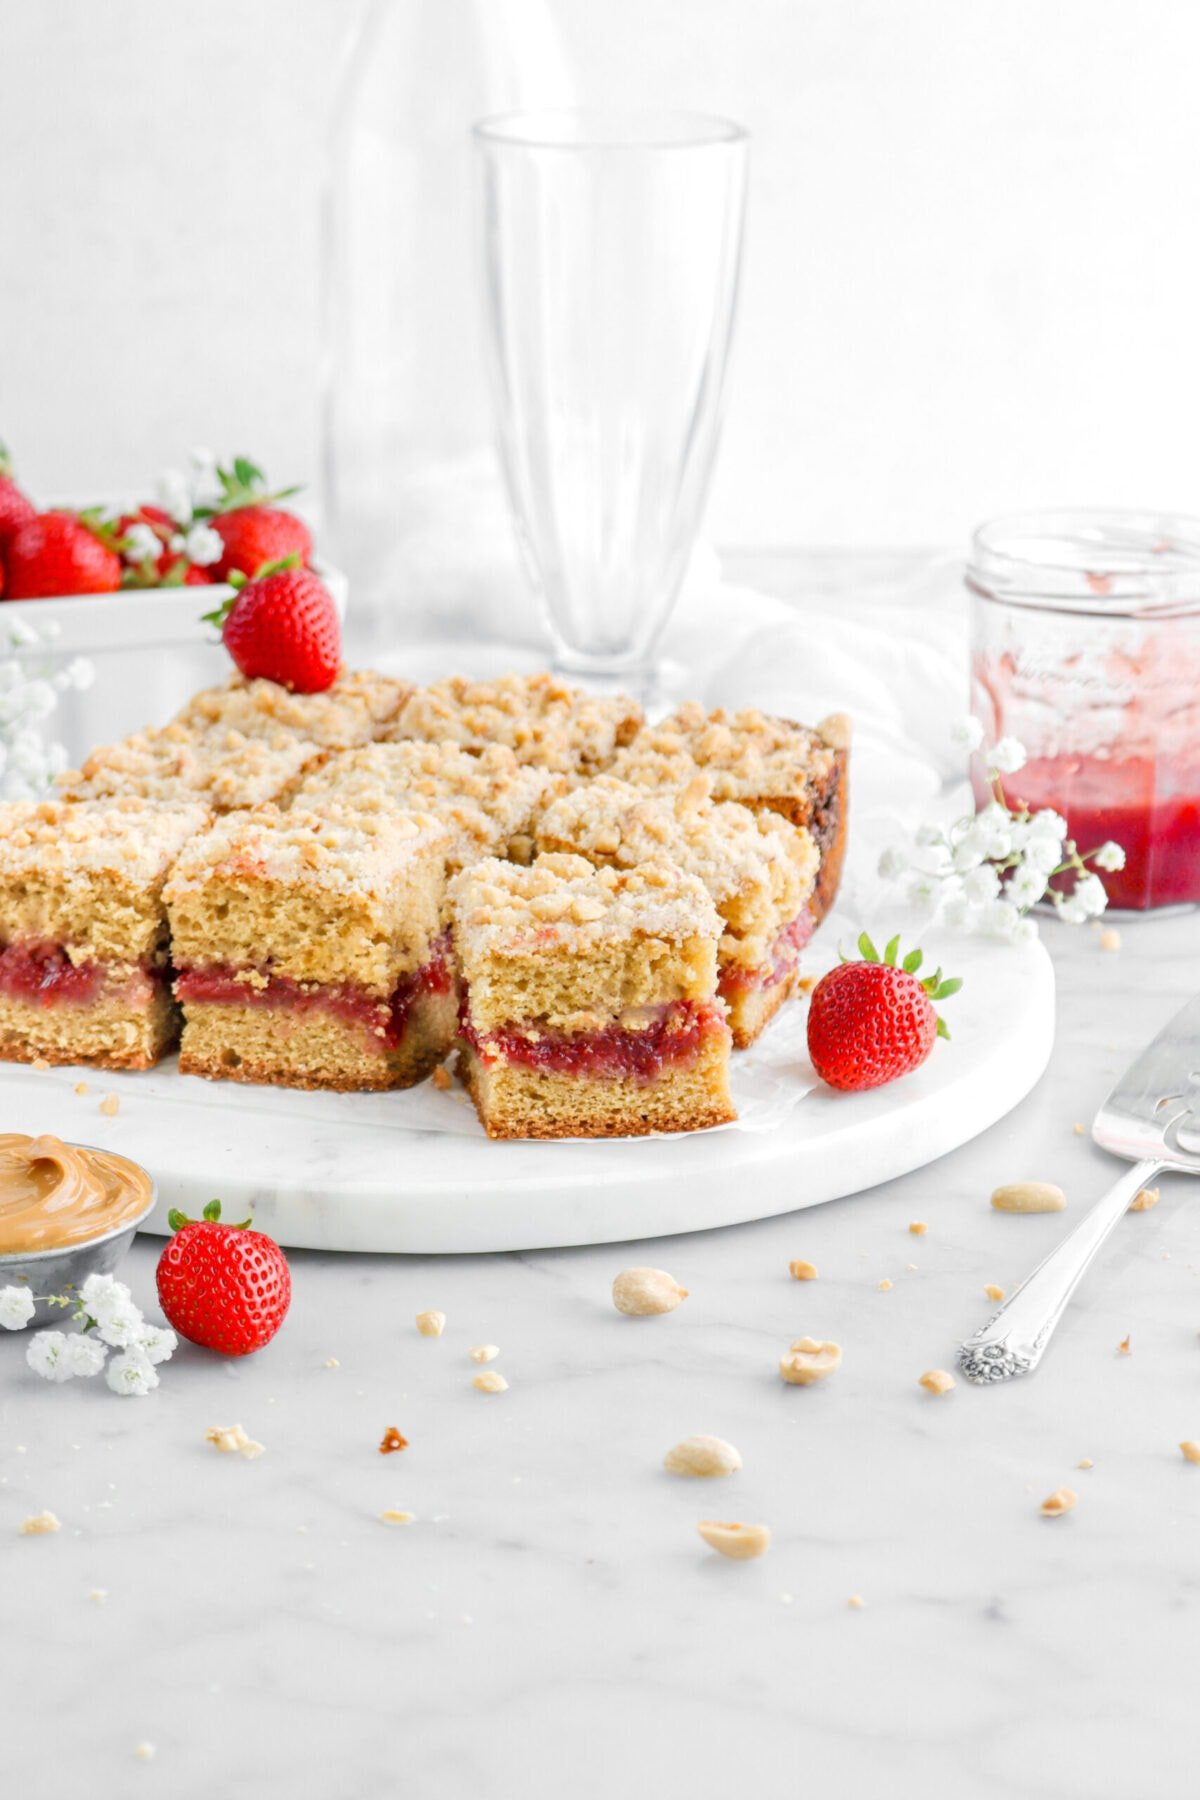 peanut butter and jelly coffee cake square slices on marble surface with white flowers, strawberries, jar of strawberry jam, small bowl of peanut butter, and peanuts around.